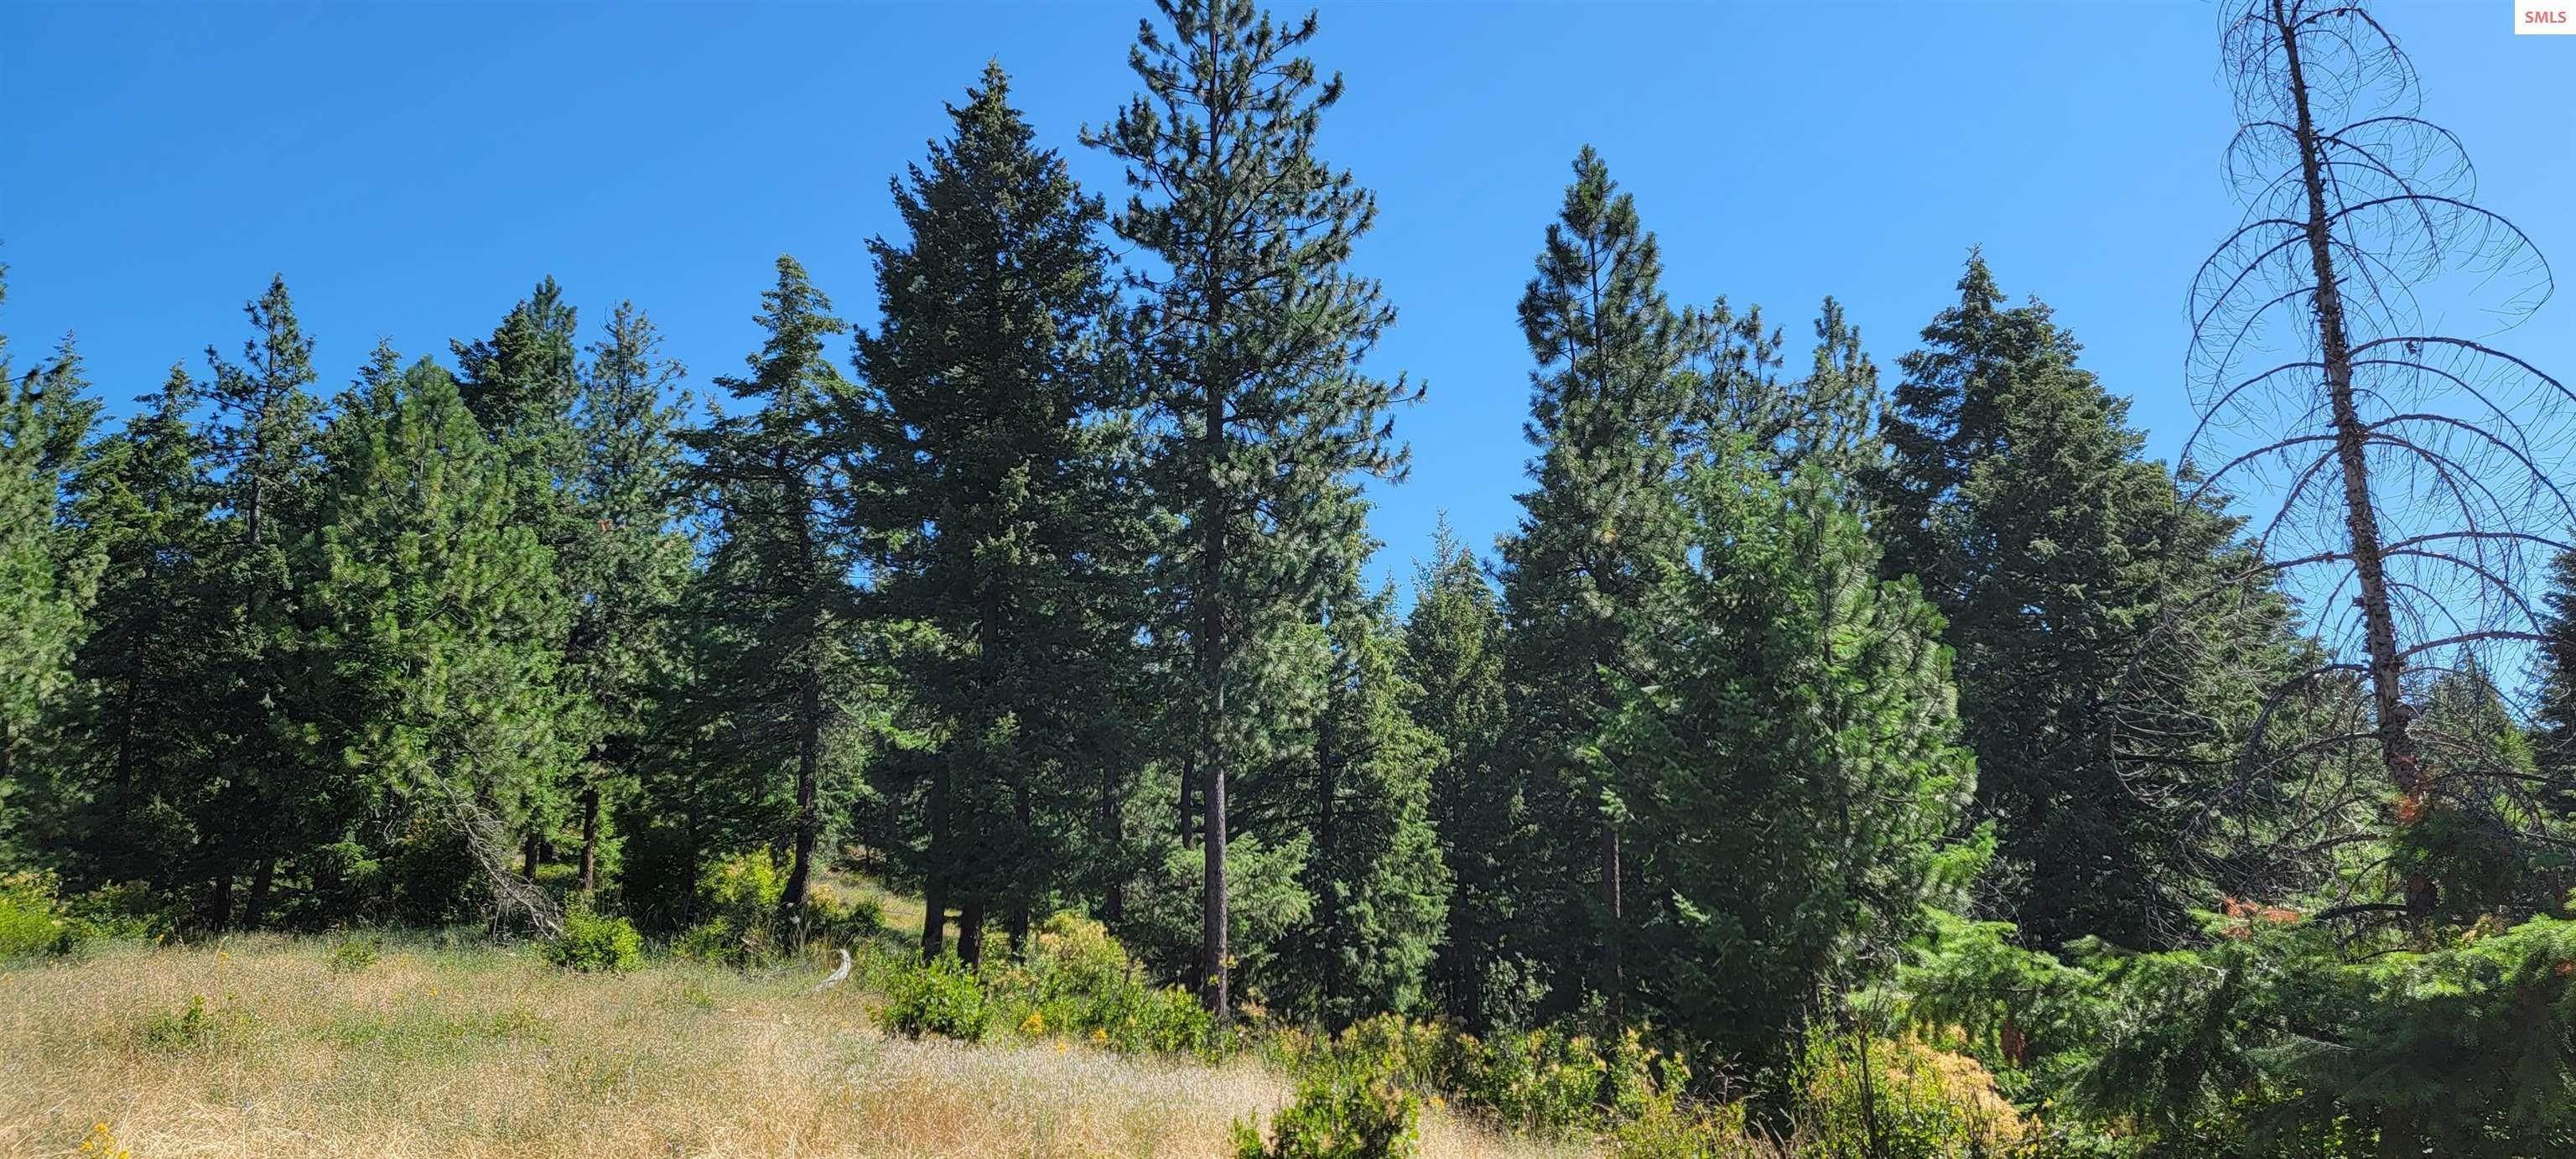 24. Land for Sale at NNA Bobsled Trail Coeur d’Alene, Idaho 83814 United States